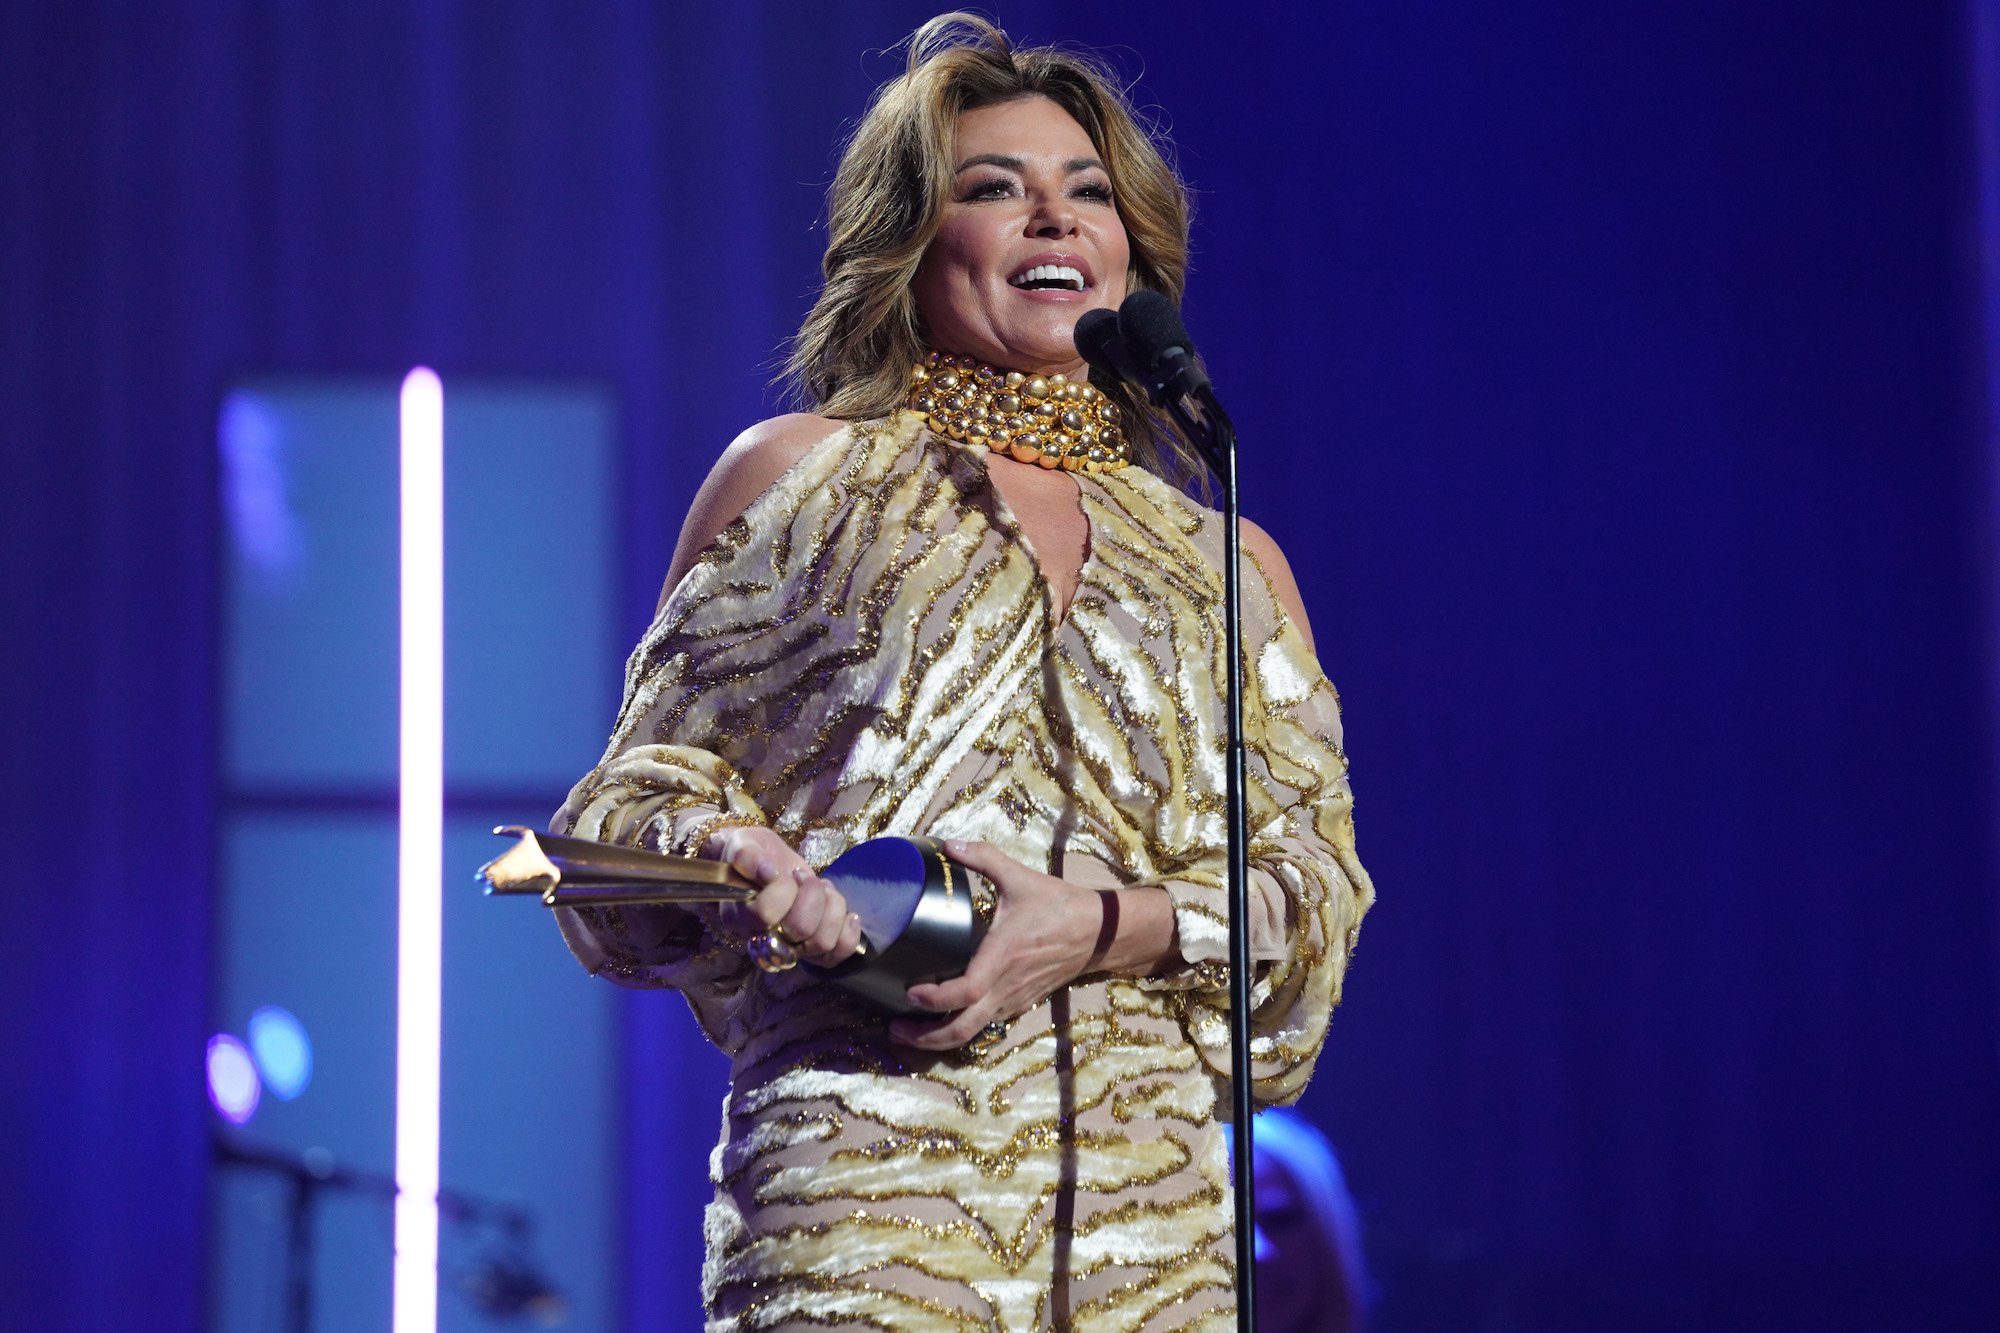 How Being a Resort Singer Helped Launch Shania Twain’s Music Career